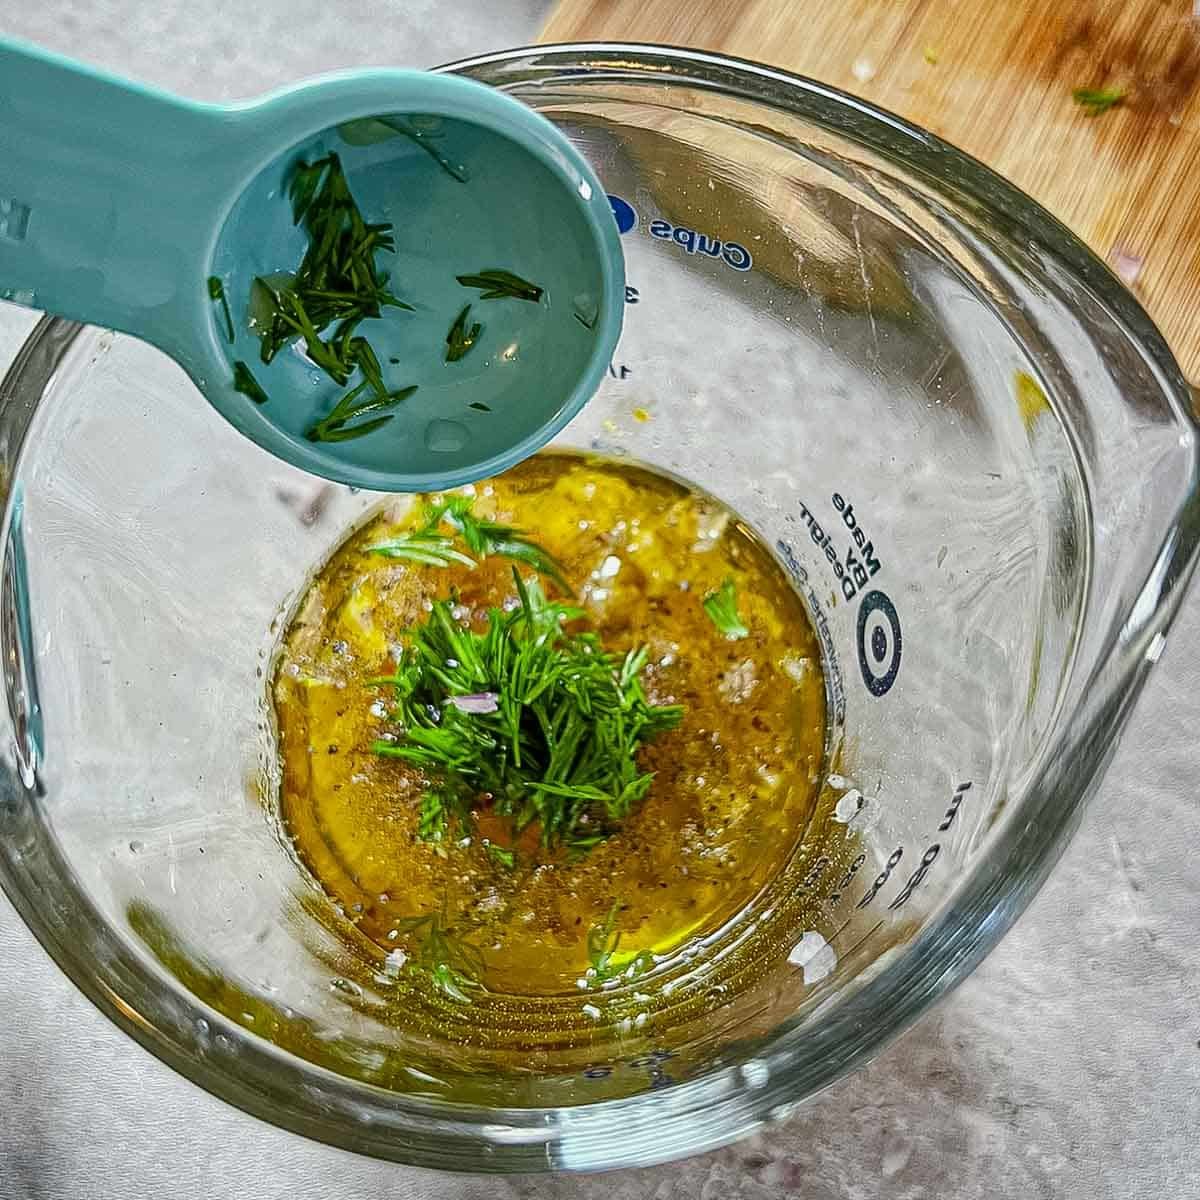 dill being added to vinaigrette